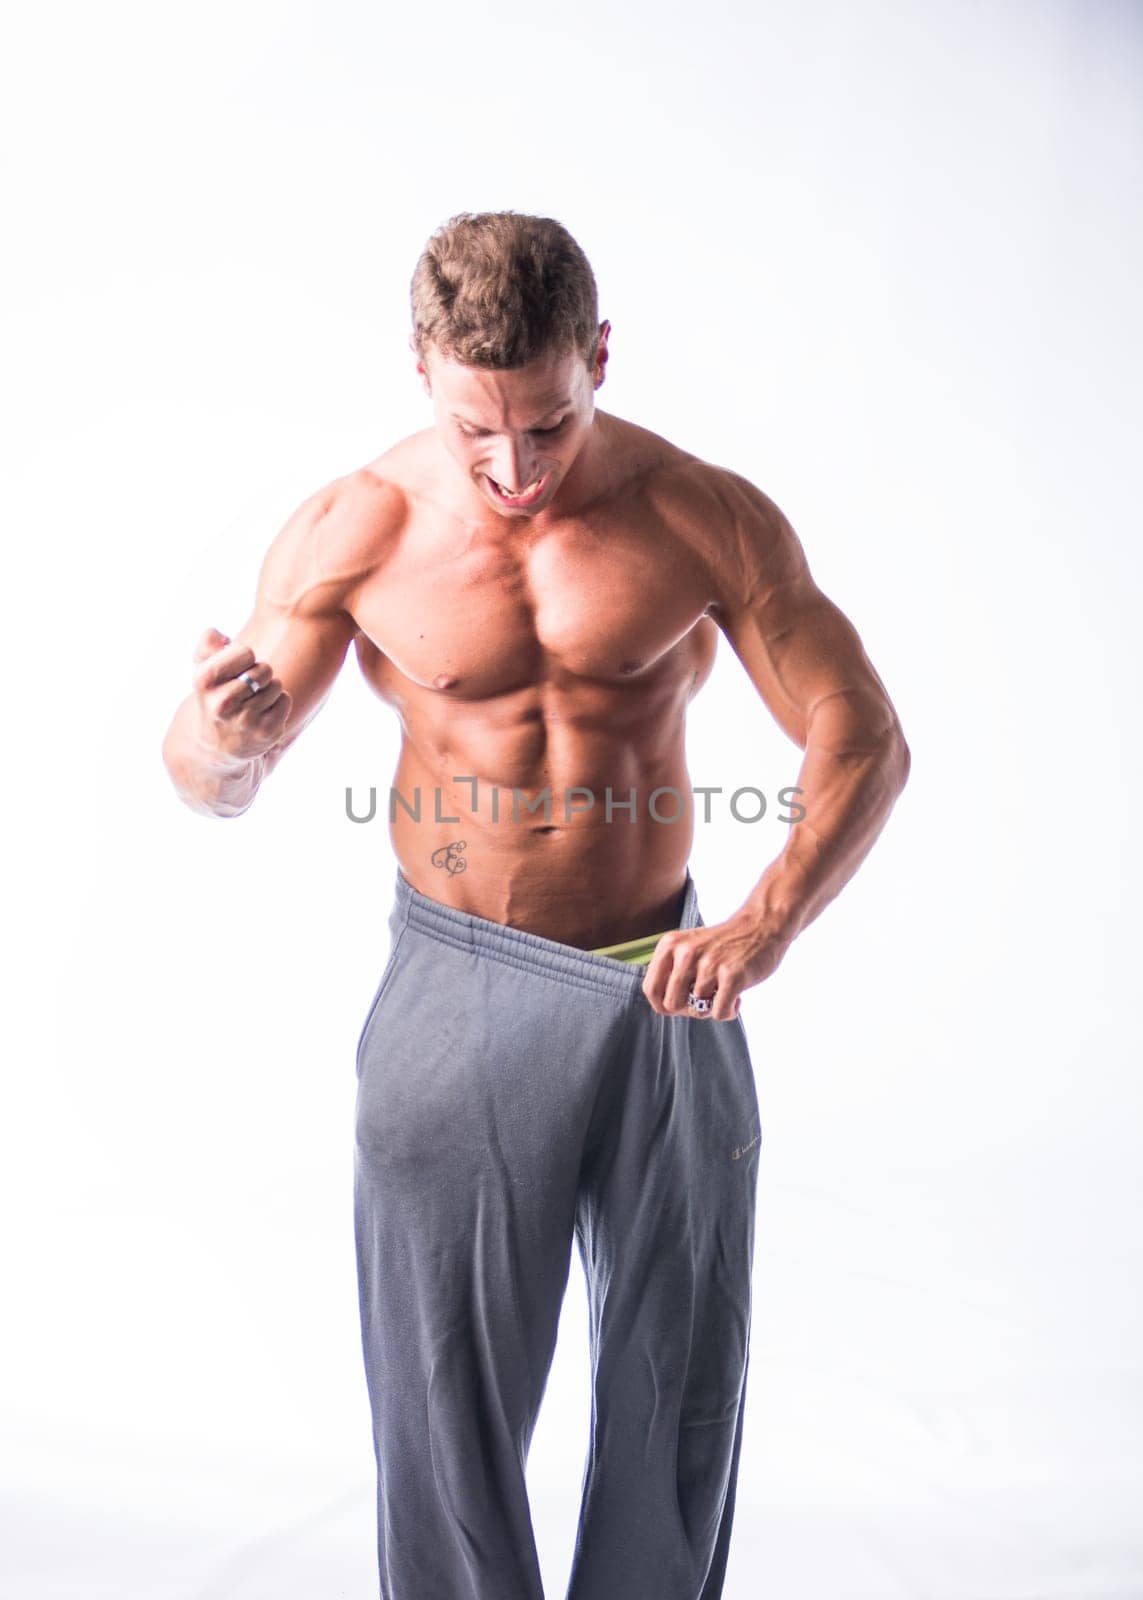 Shirtless Male Bodybuilder Has Lost Weight, Wearing Large Pants by artofphoto